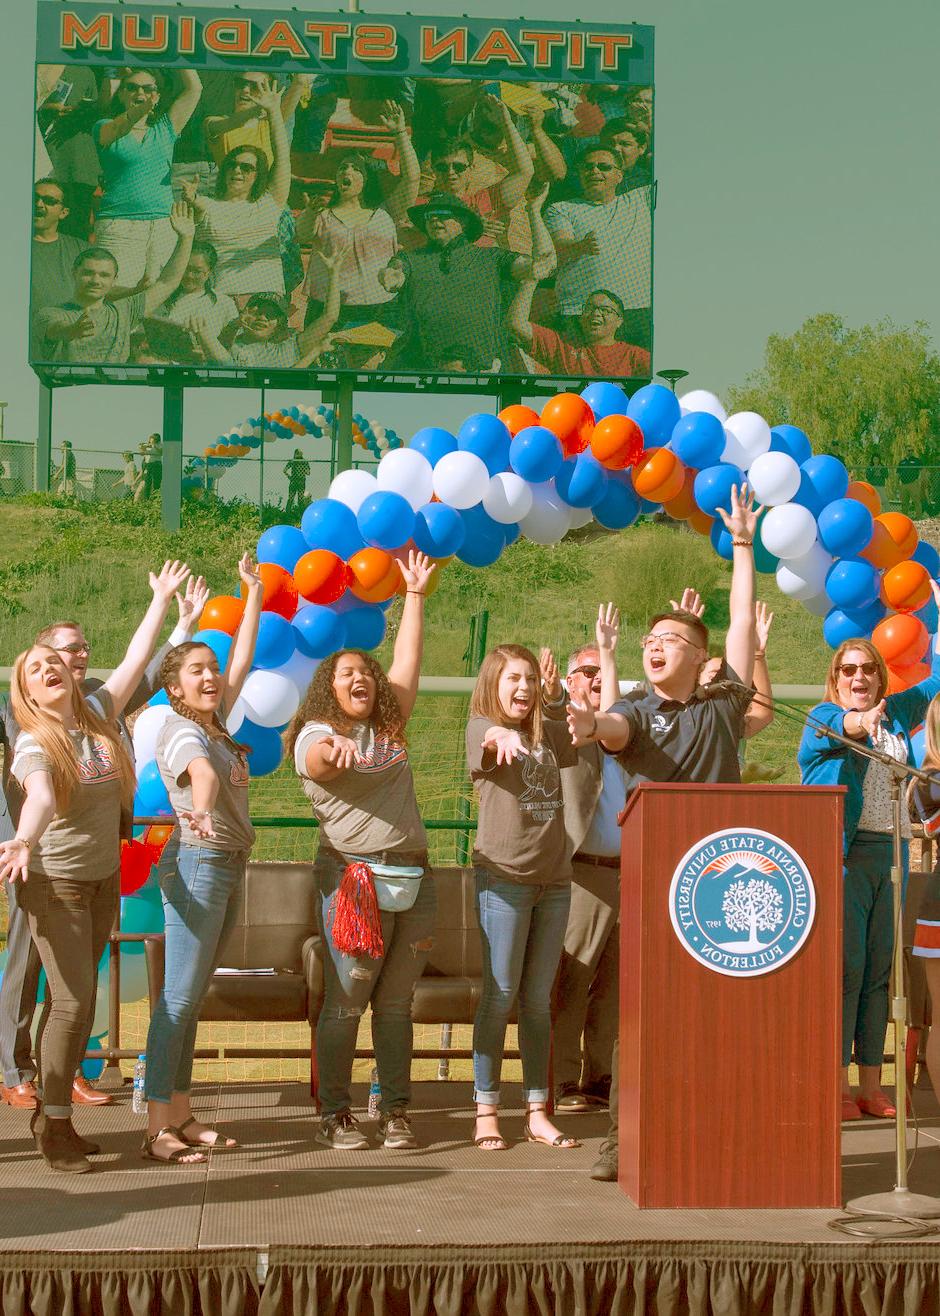 Students celebrating a CSUF event